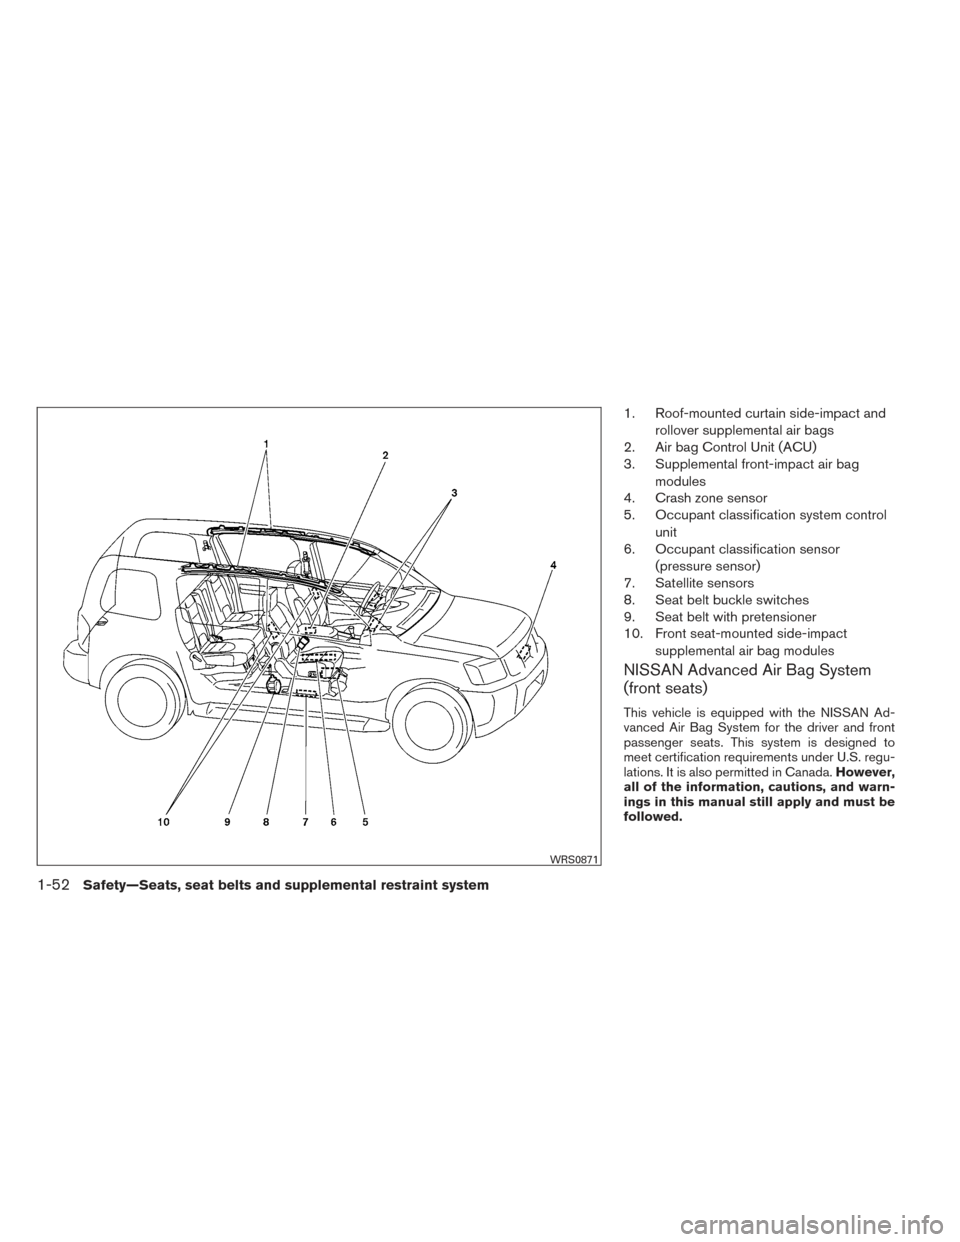 NISSAN XTERRA 2014 N50 / 2.G Manual PDF 1. Roof-mounted curtain side-impact androllover supplemental air bags
2. Air bag Control Unit (ACU)
3. Supplemental front-impact air bag
modules
4. Crash zone sensor
5. Occupant classification system 